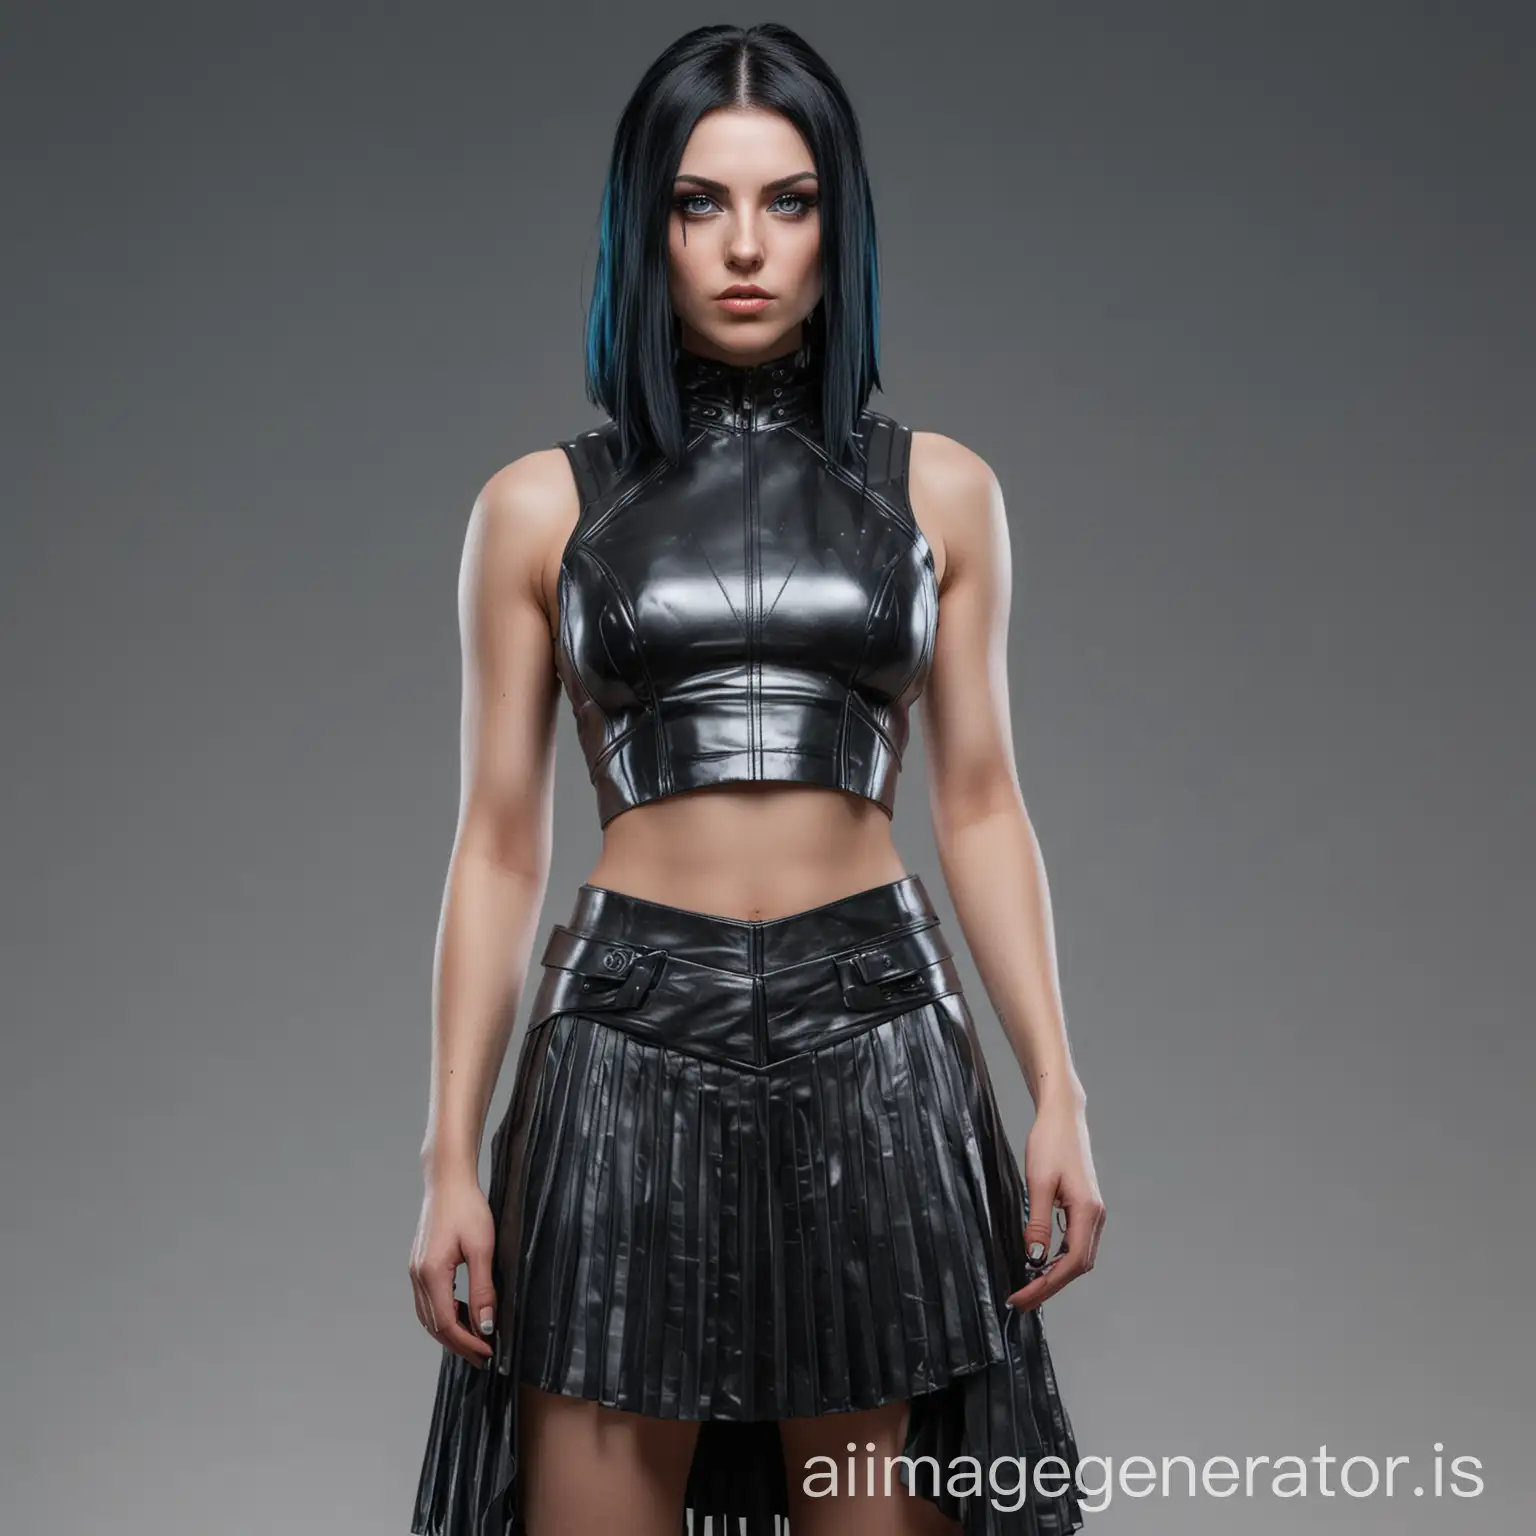 A ((slightly (goth punk) (mass effect style)) woman) with long, black hair and (silver blue) eyes, dressed in a futuristic sleek (((pleated leather) skirt and leather (crop top))), standing confidently. Transparent background.